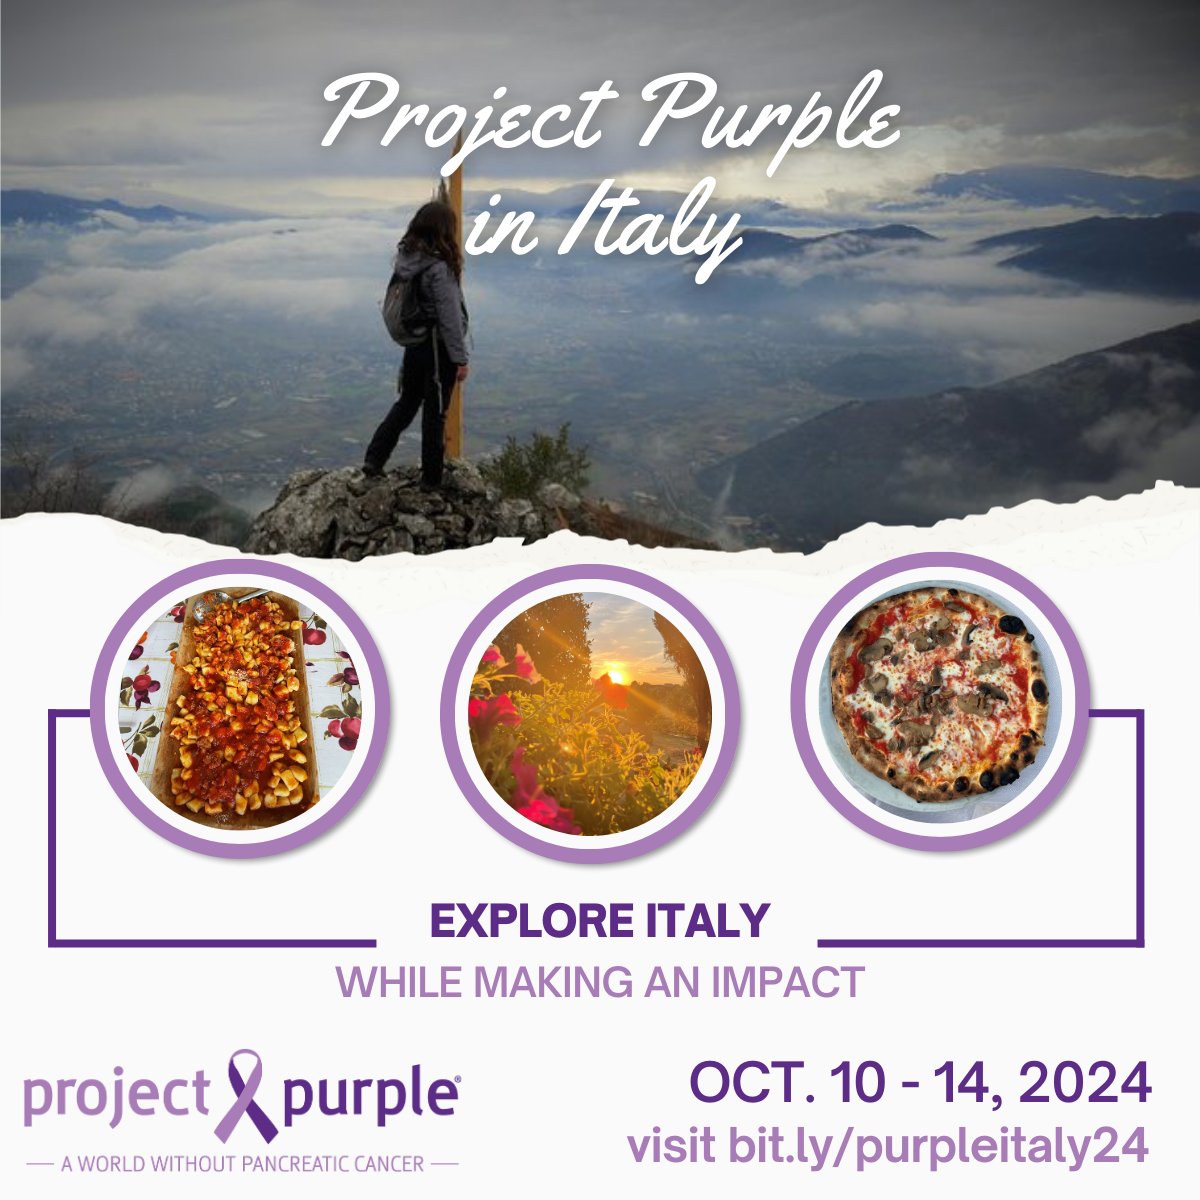 Come with us on October 10-14 and enjoy an authentic Italian experience! This will be an awesome experience with many events planned like a hike of the historic WWII battlefield of Monte Cassino: projectpurple.org/events/project…